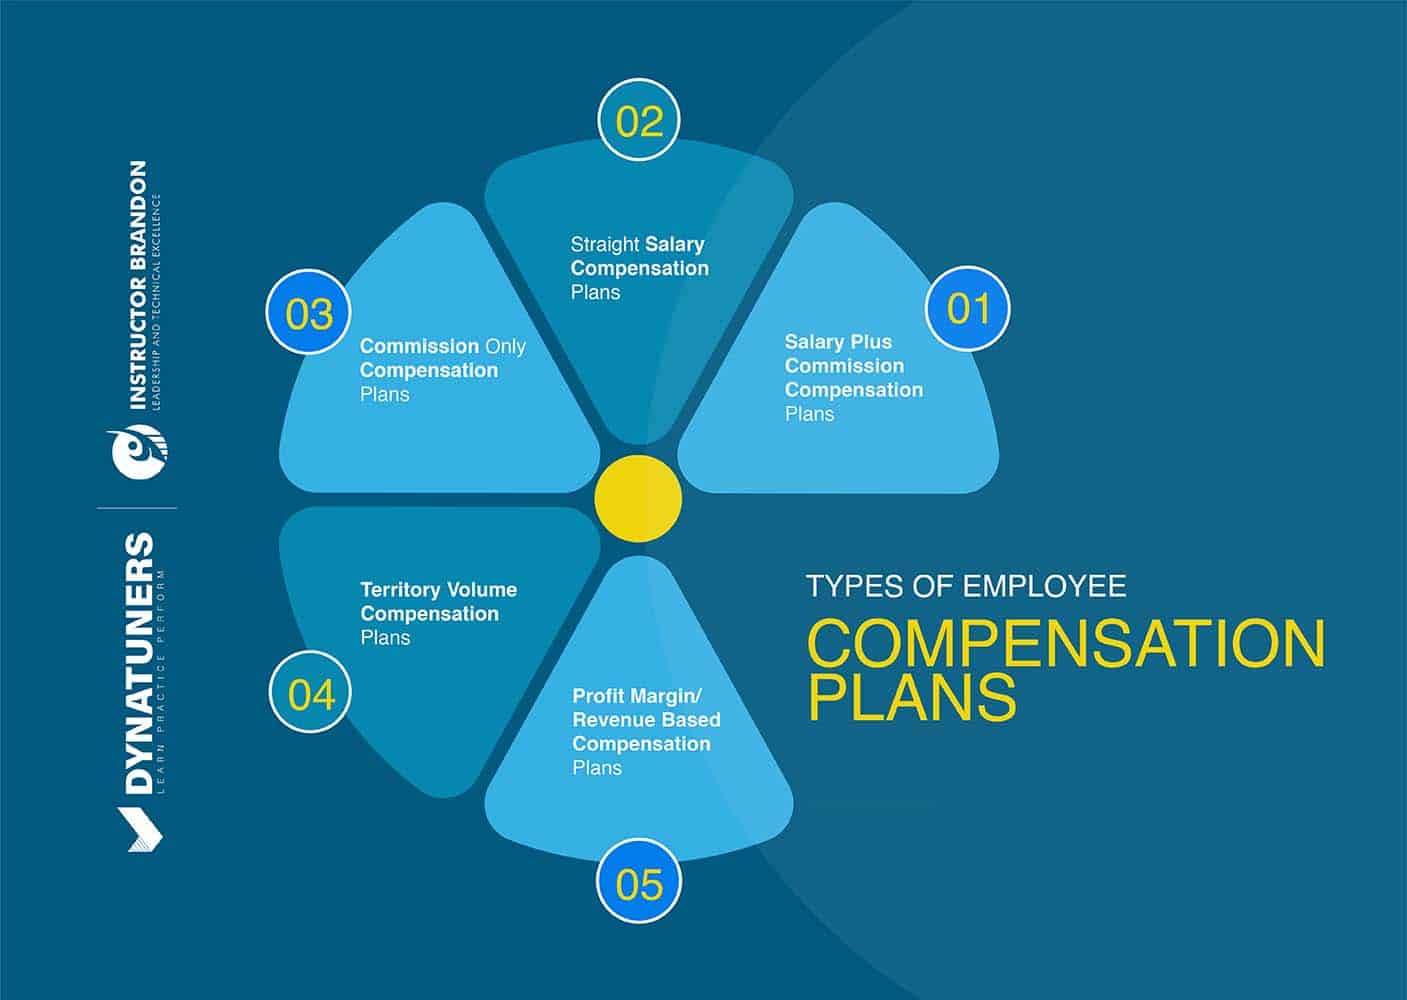 How to Create a Fixed Pay Plan with D365 Compensation Plans